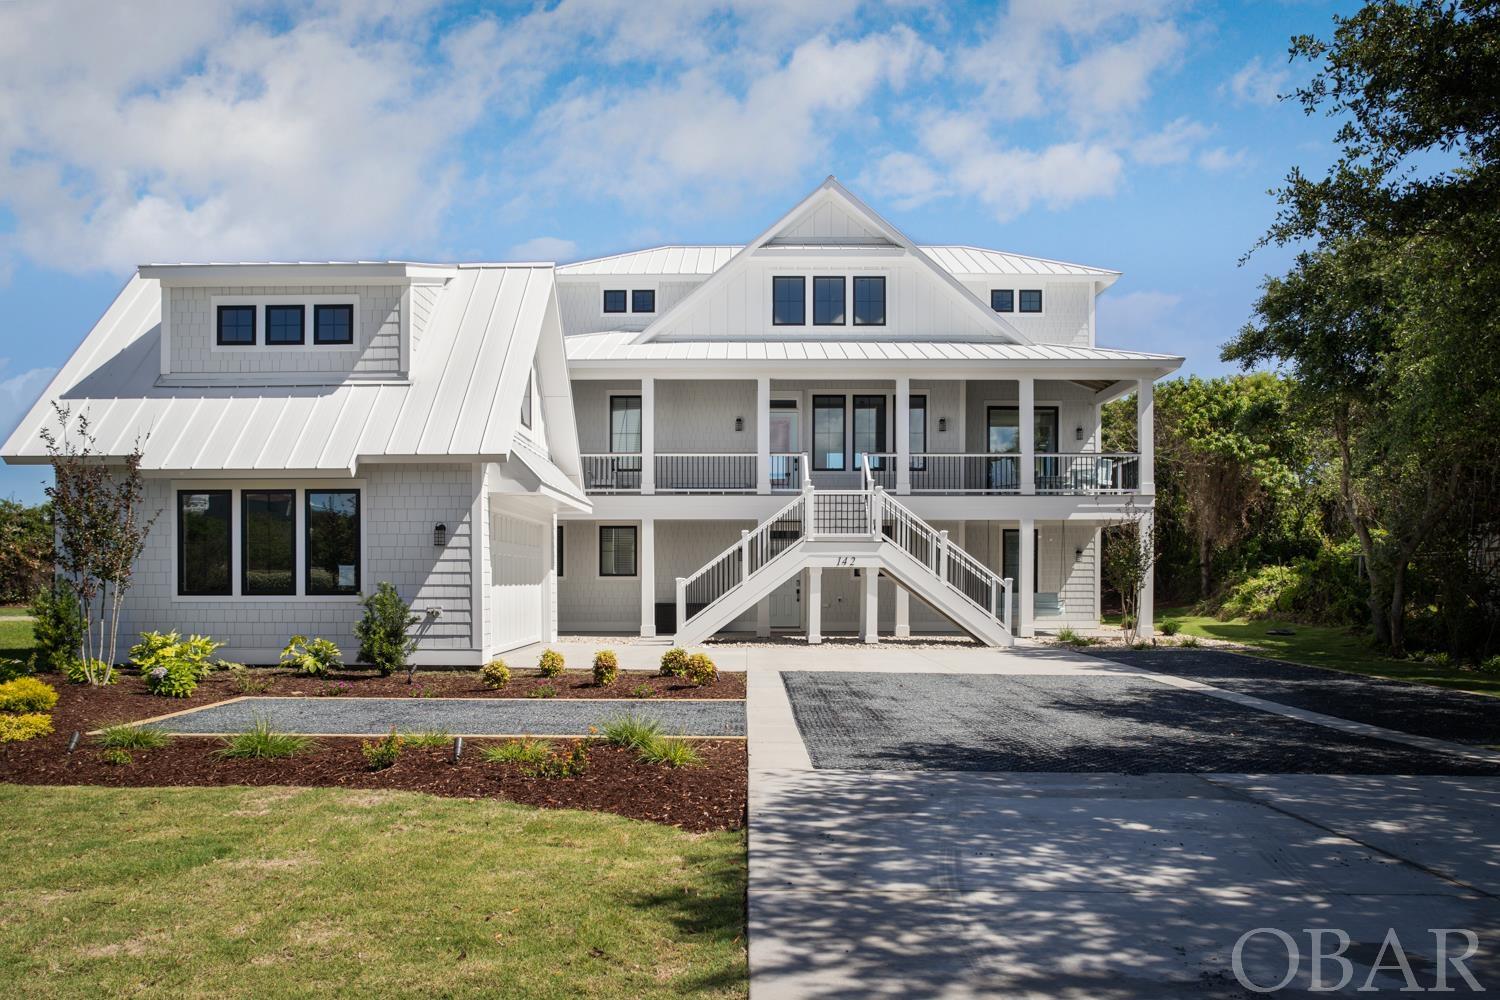 This exquisite new construction is just steps from the beach in a prime location within Duck Village. With luxurious, modern touches throughout, this custom made 7 bedroom, 7 and a half bath home has all the amenities you could think of. Thoughtfully designed, the main living space is on the middle level, with lots of large windows, plenty of natural light, and 18 ft ceilings. The open chef's kitchen, dining, and living room opens to both the front and back decks and flows beautifully to the master suite with large walk-in closet, dual vanity, freestanding tub, walk-in shower, and private water closet.  The staircase upstairs takes you to a lofted walkway connecting two more spacious master bedrooms with private baths on the third floor.  Three additional master suites are on the ground level floor, each with a private bath plus the laundry room. Also on the ground level is a large rec room with pool table, 2 Large TVs, Sonos Sound System, wet bar, extra sitting area, and direct access to the back yard and private pool area. The home offers great outdoor space all around, including a back covered patio near the pool and hot tub and tons of greenspace. A unique feature is a detached guest suite over the garage with covered access from the main house.  The guest suite features a beautiful iron king bed, and a wet bar with an under the counter beverage refrigerator and private bath.  Top quality construction with all premium products makes this home a step above all others. Special features include a metal roof, top of the line LVP Flooring by Greyne, Timbertech Composite Decking, an outlet for Electric Vehicle Charging Station and an Outlet for Golf Cart Charging, custom audio/visual system with Sonos speakers throughout, and a double outdoor shower.